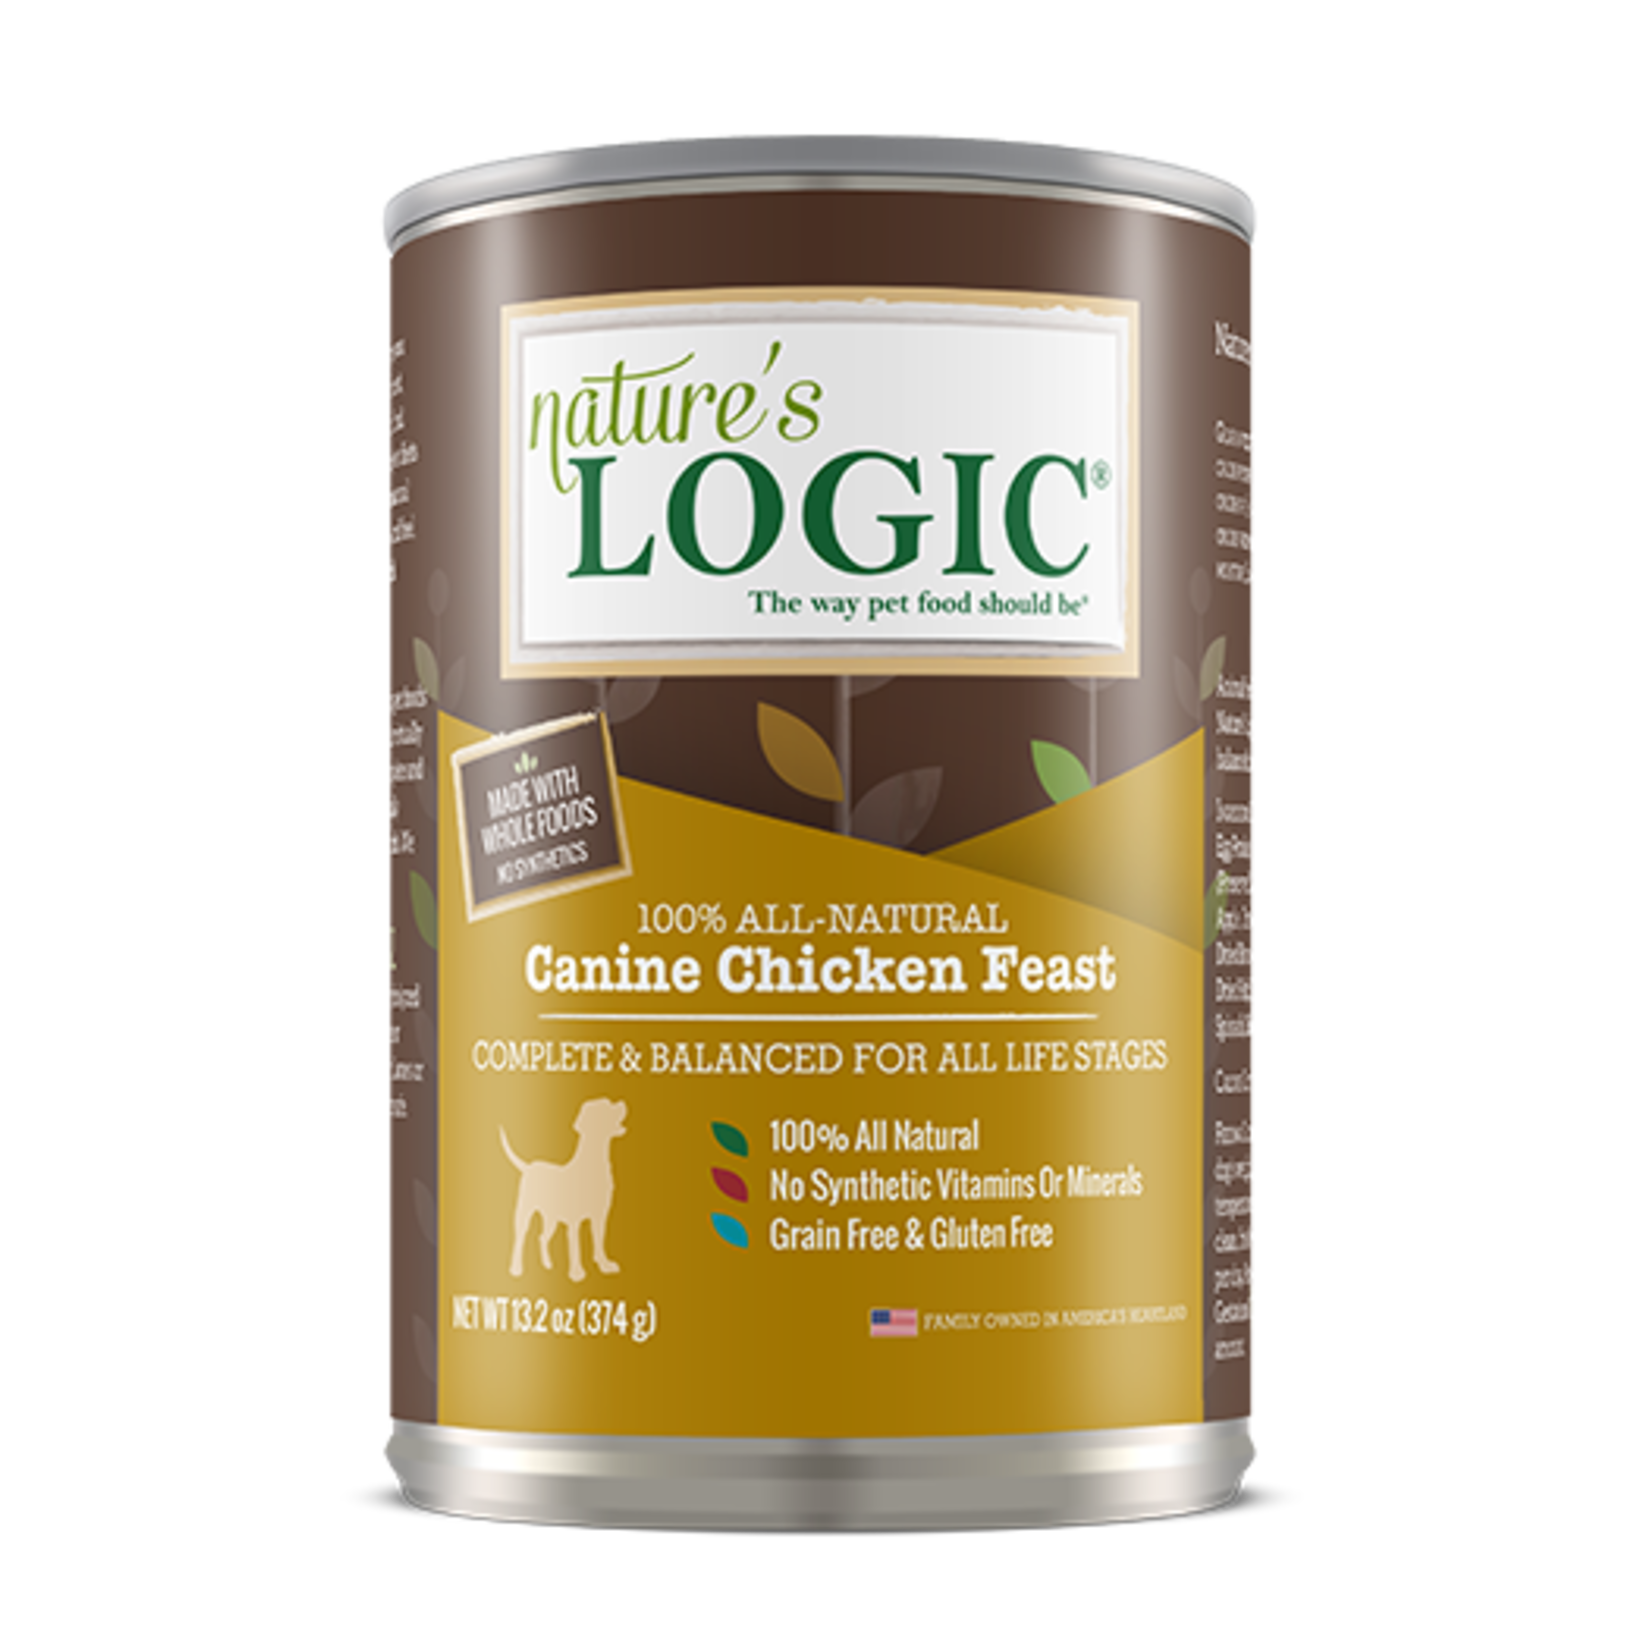 Natures Logic Nature's Logic Wet Dog Food Chicken Feast 13oz Can Grain Free